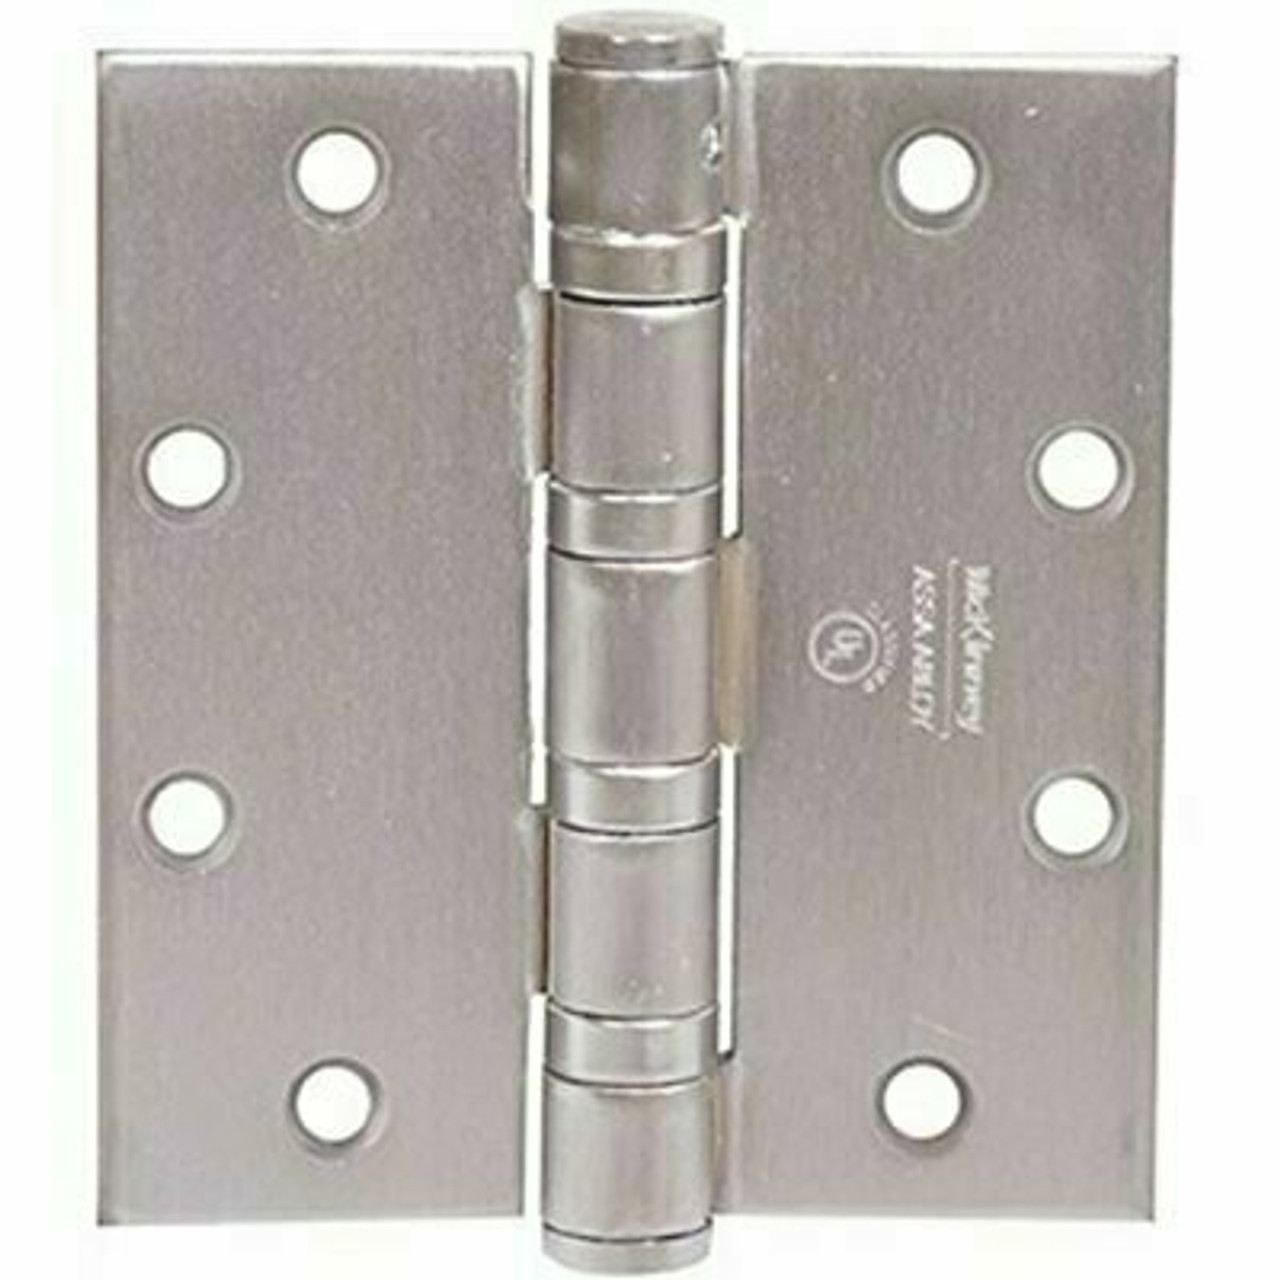 Mckinney 4.5 In. X 4.5 In. Standard Weight 5-Knuckle Hinges (3-Pack) - 307492419